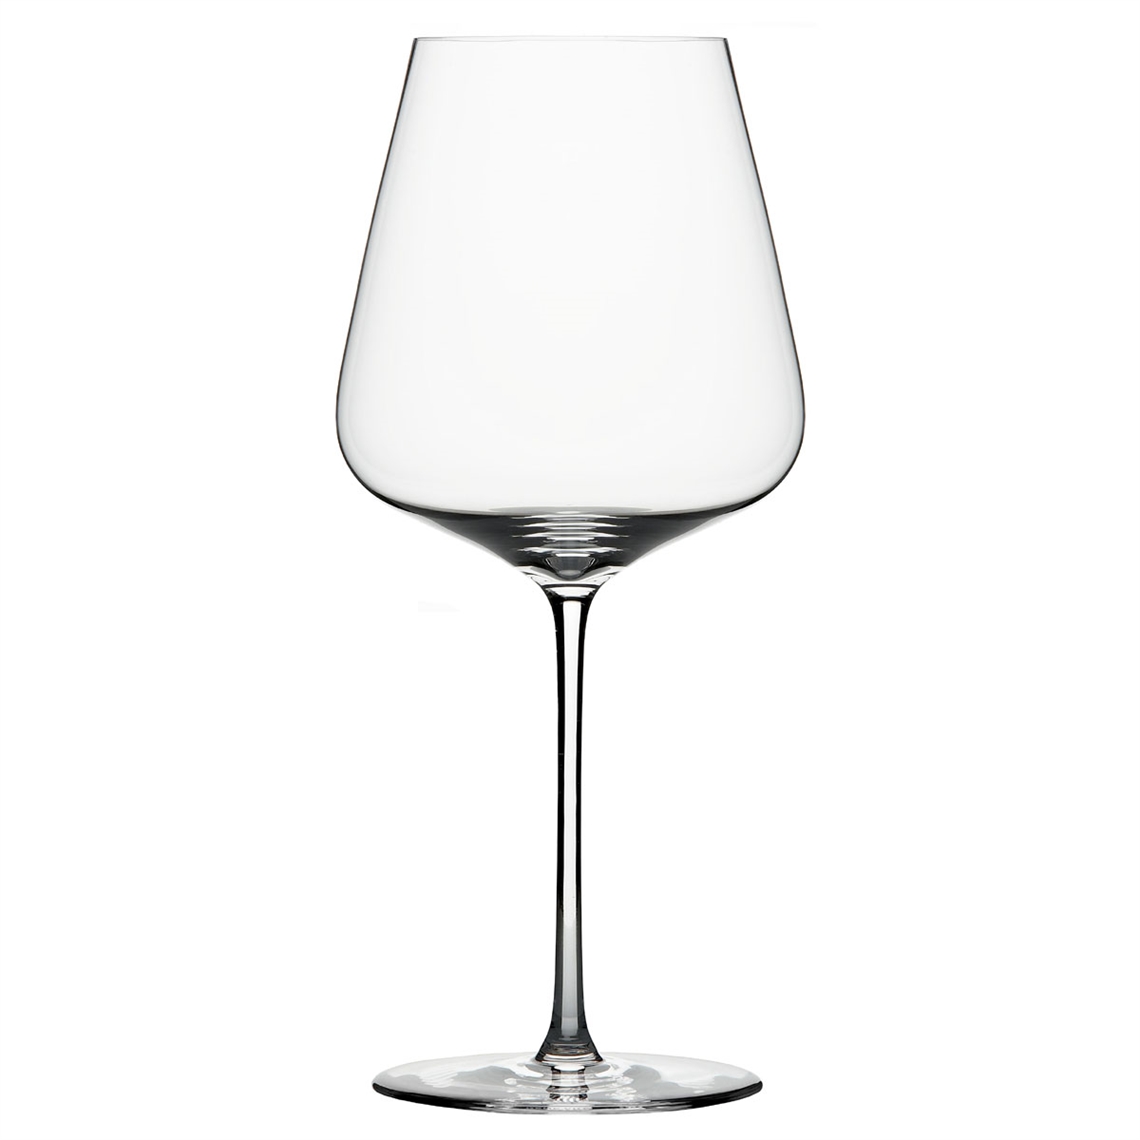 View more schott zwiesel from our Premium Mouth Blown Glassware range